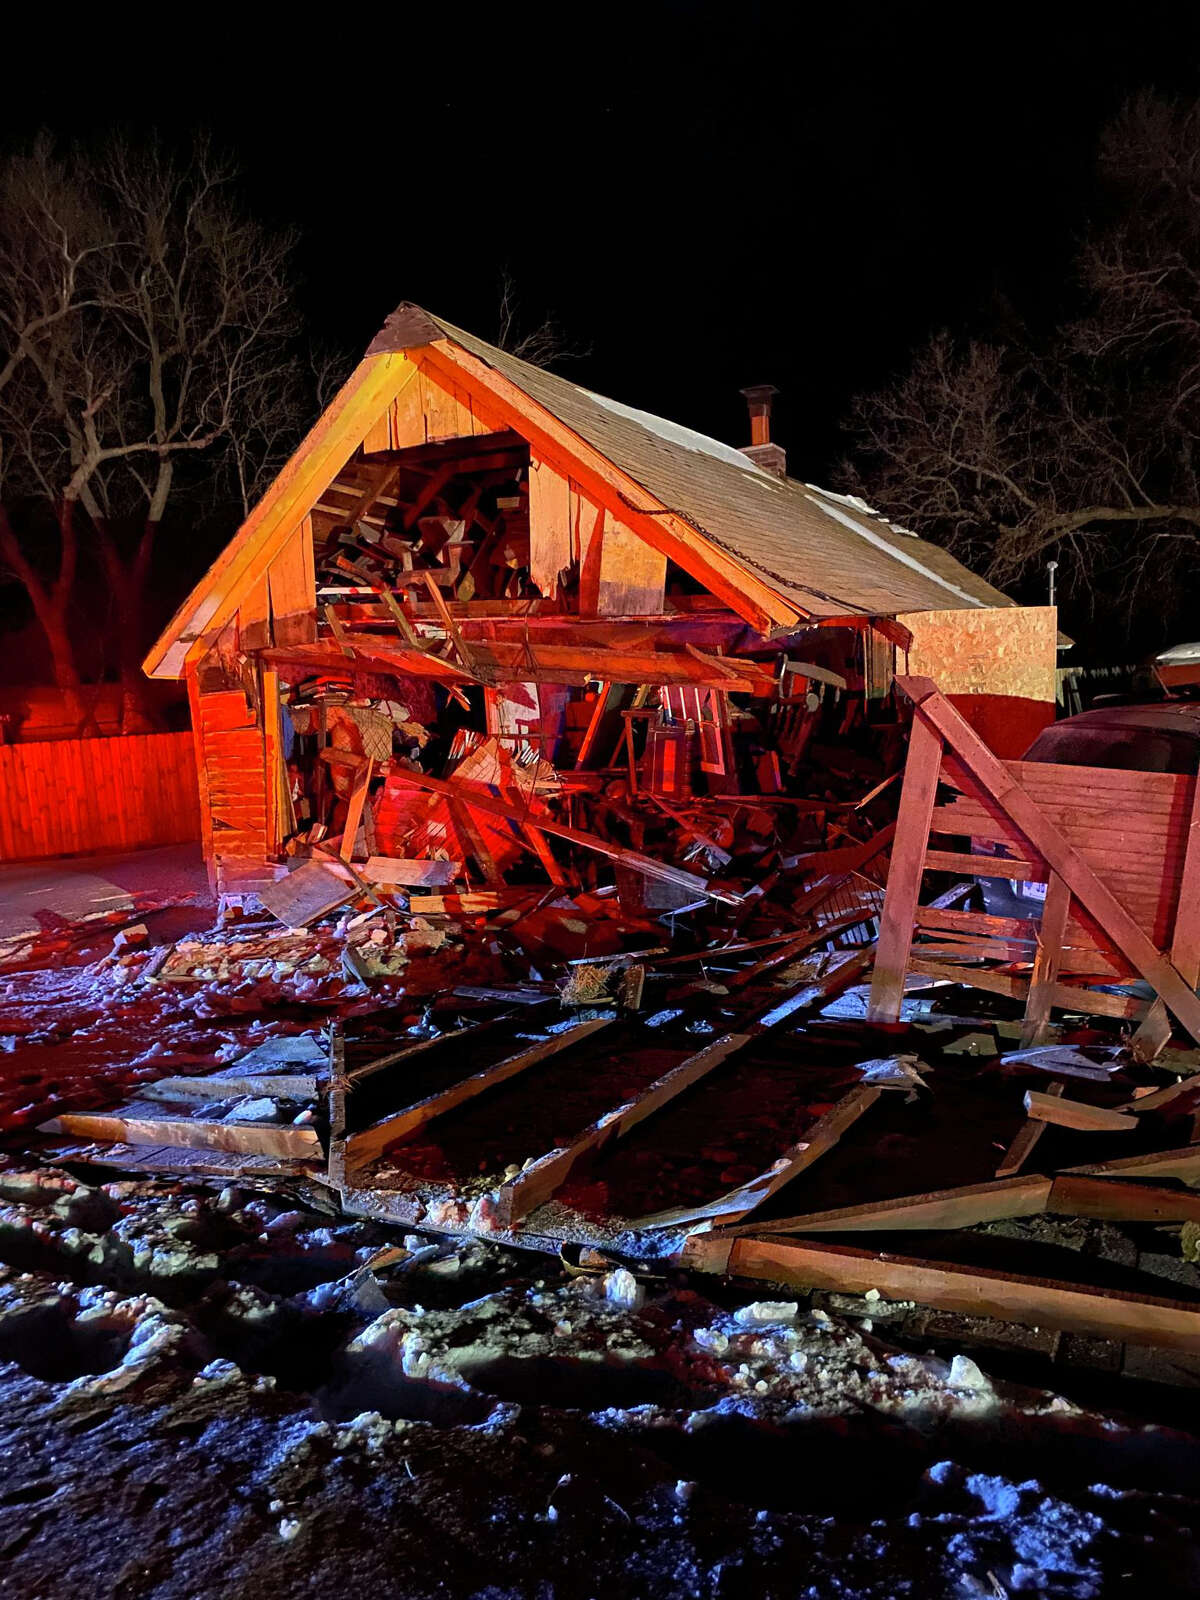 The Michigan State Police said a 47-year-old Midland woman was traveling eastbound on M-32 when she left the roadway and crashed into an abandoned home around 9:30 p.m. on Thursday, March 3, 2022 near Buell Road in Elmira Township. 